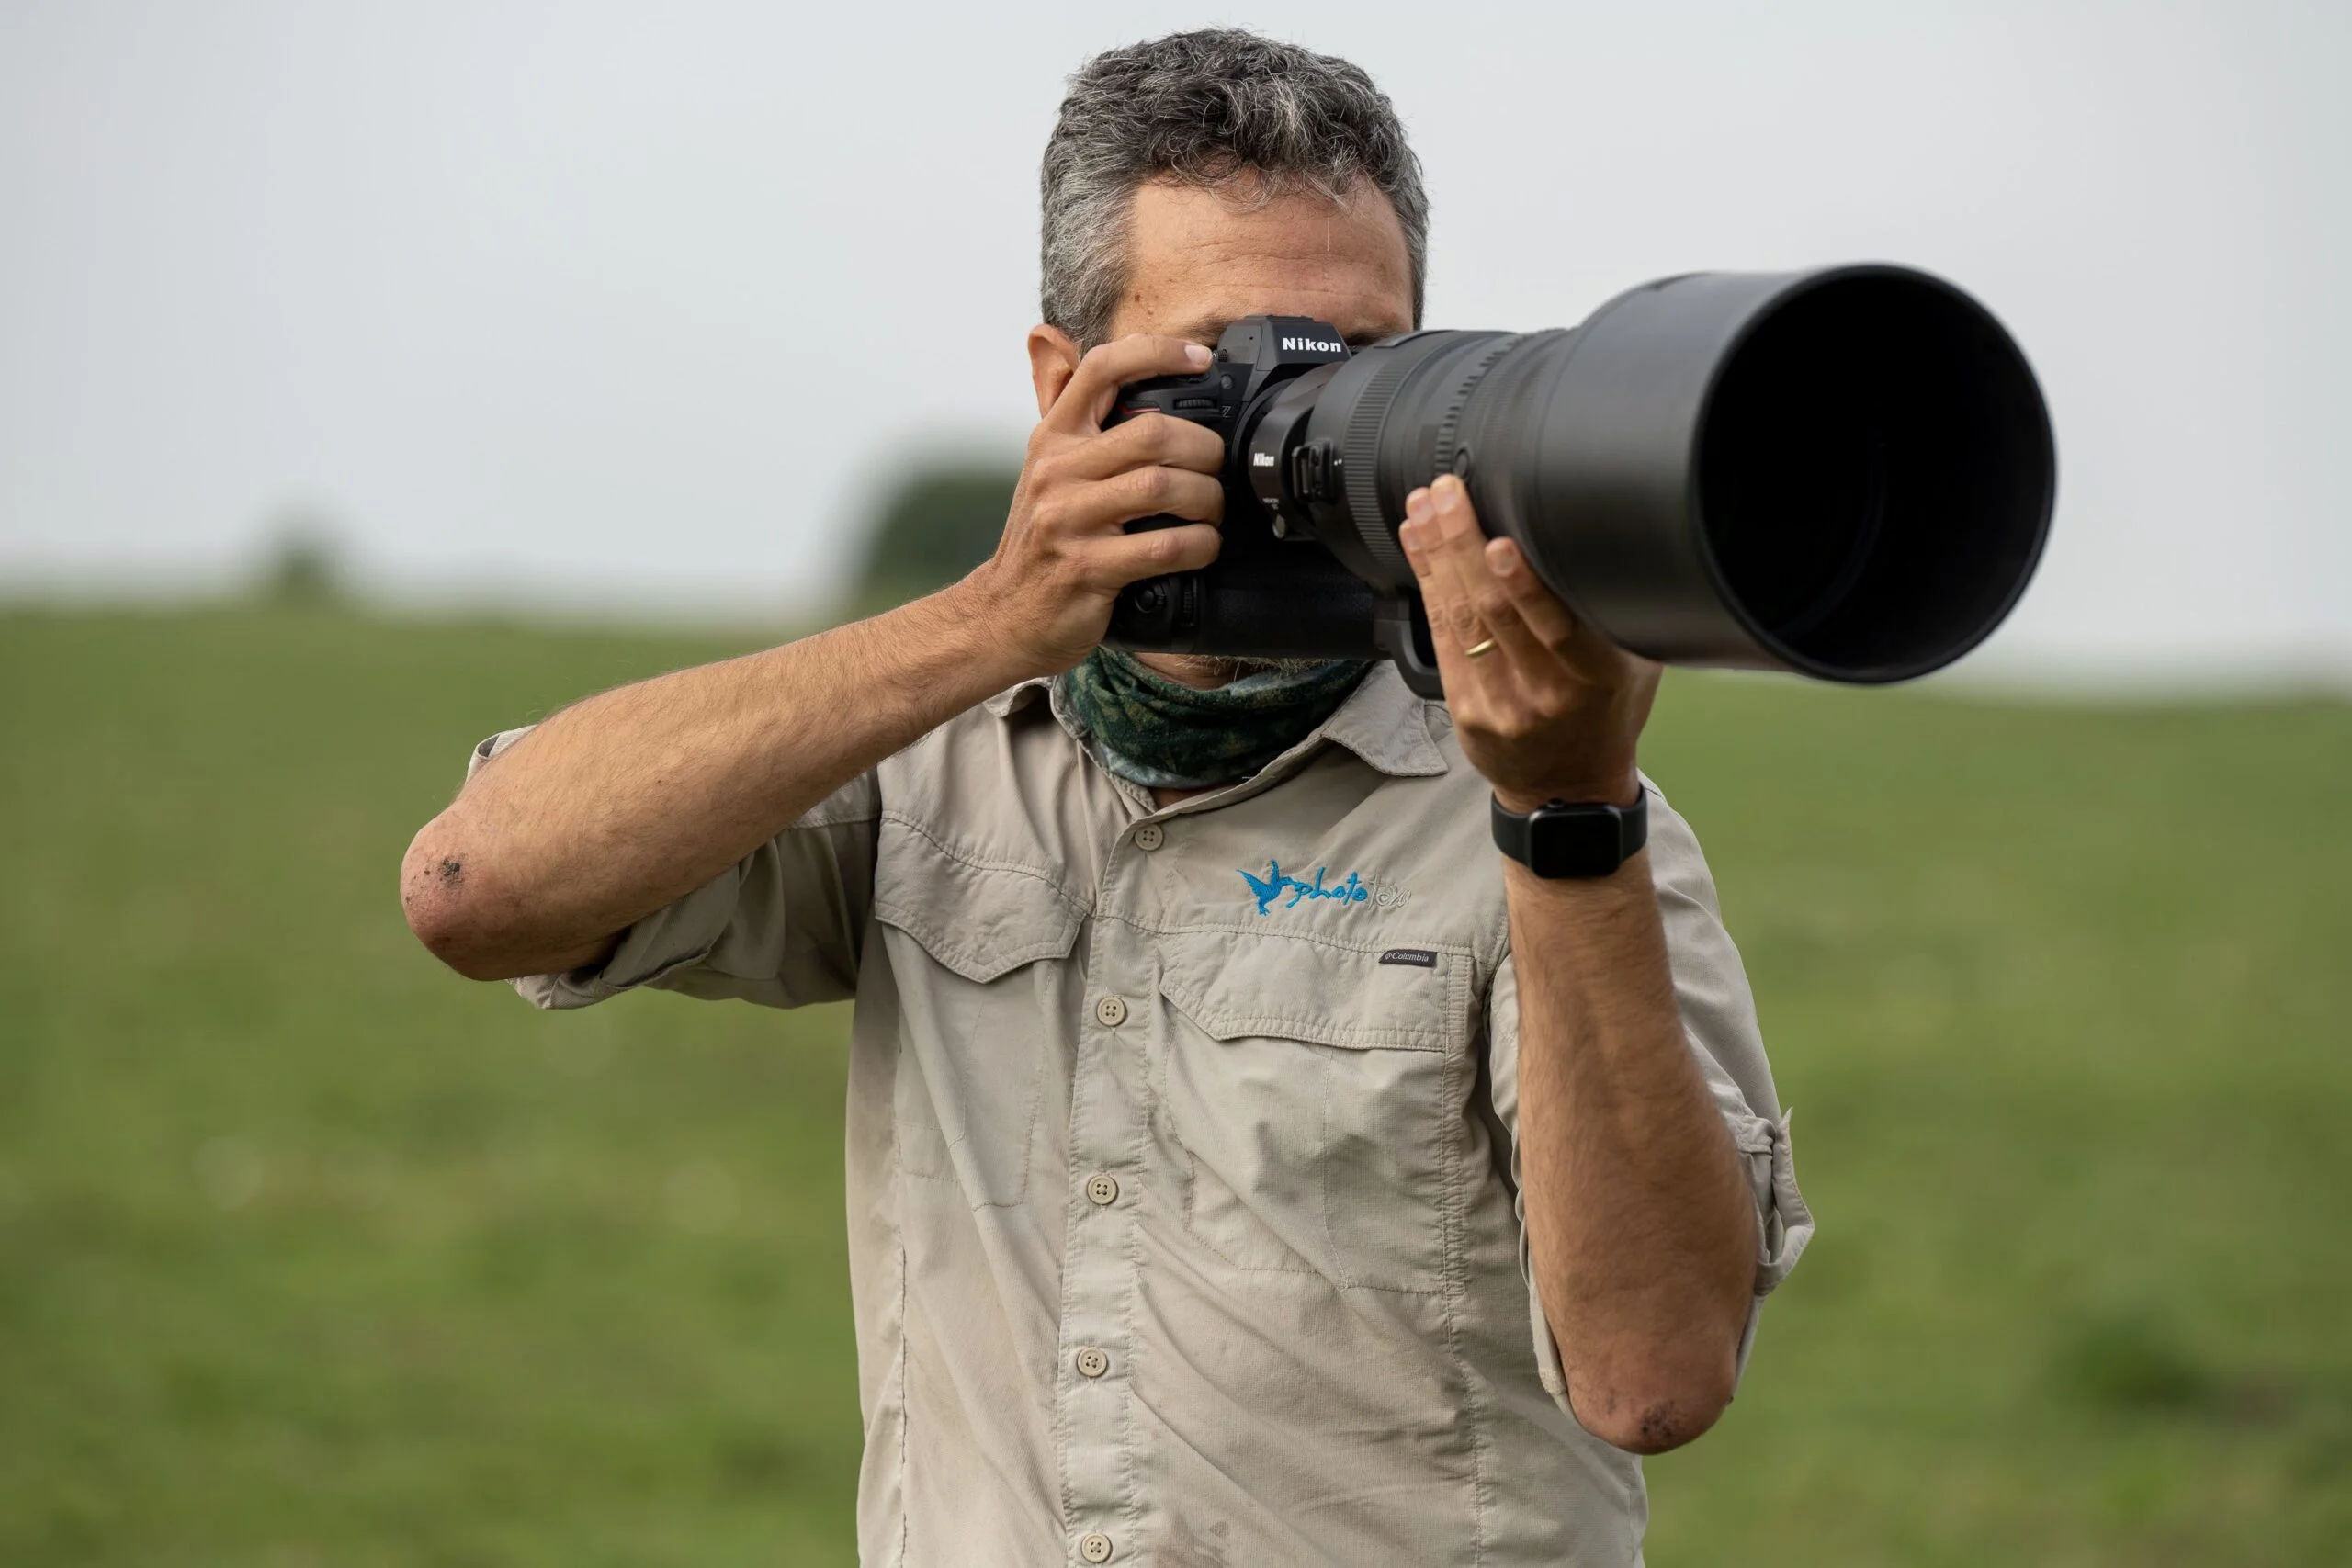 In nature, there is always something interesting happening, and occasionally your desired target might be hundreds of meters distant. You may focus on that moment more closely with a telephoto lens without sacrificing image quality owing to distance.